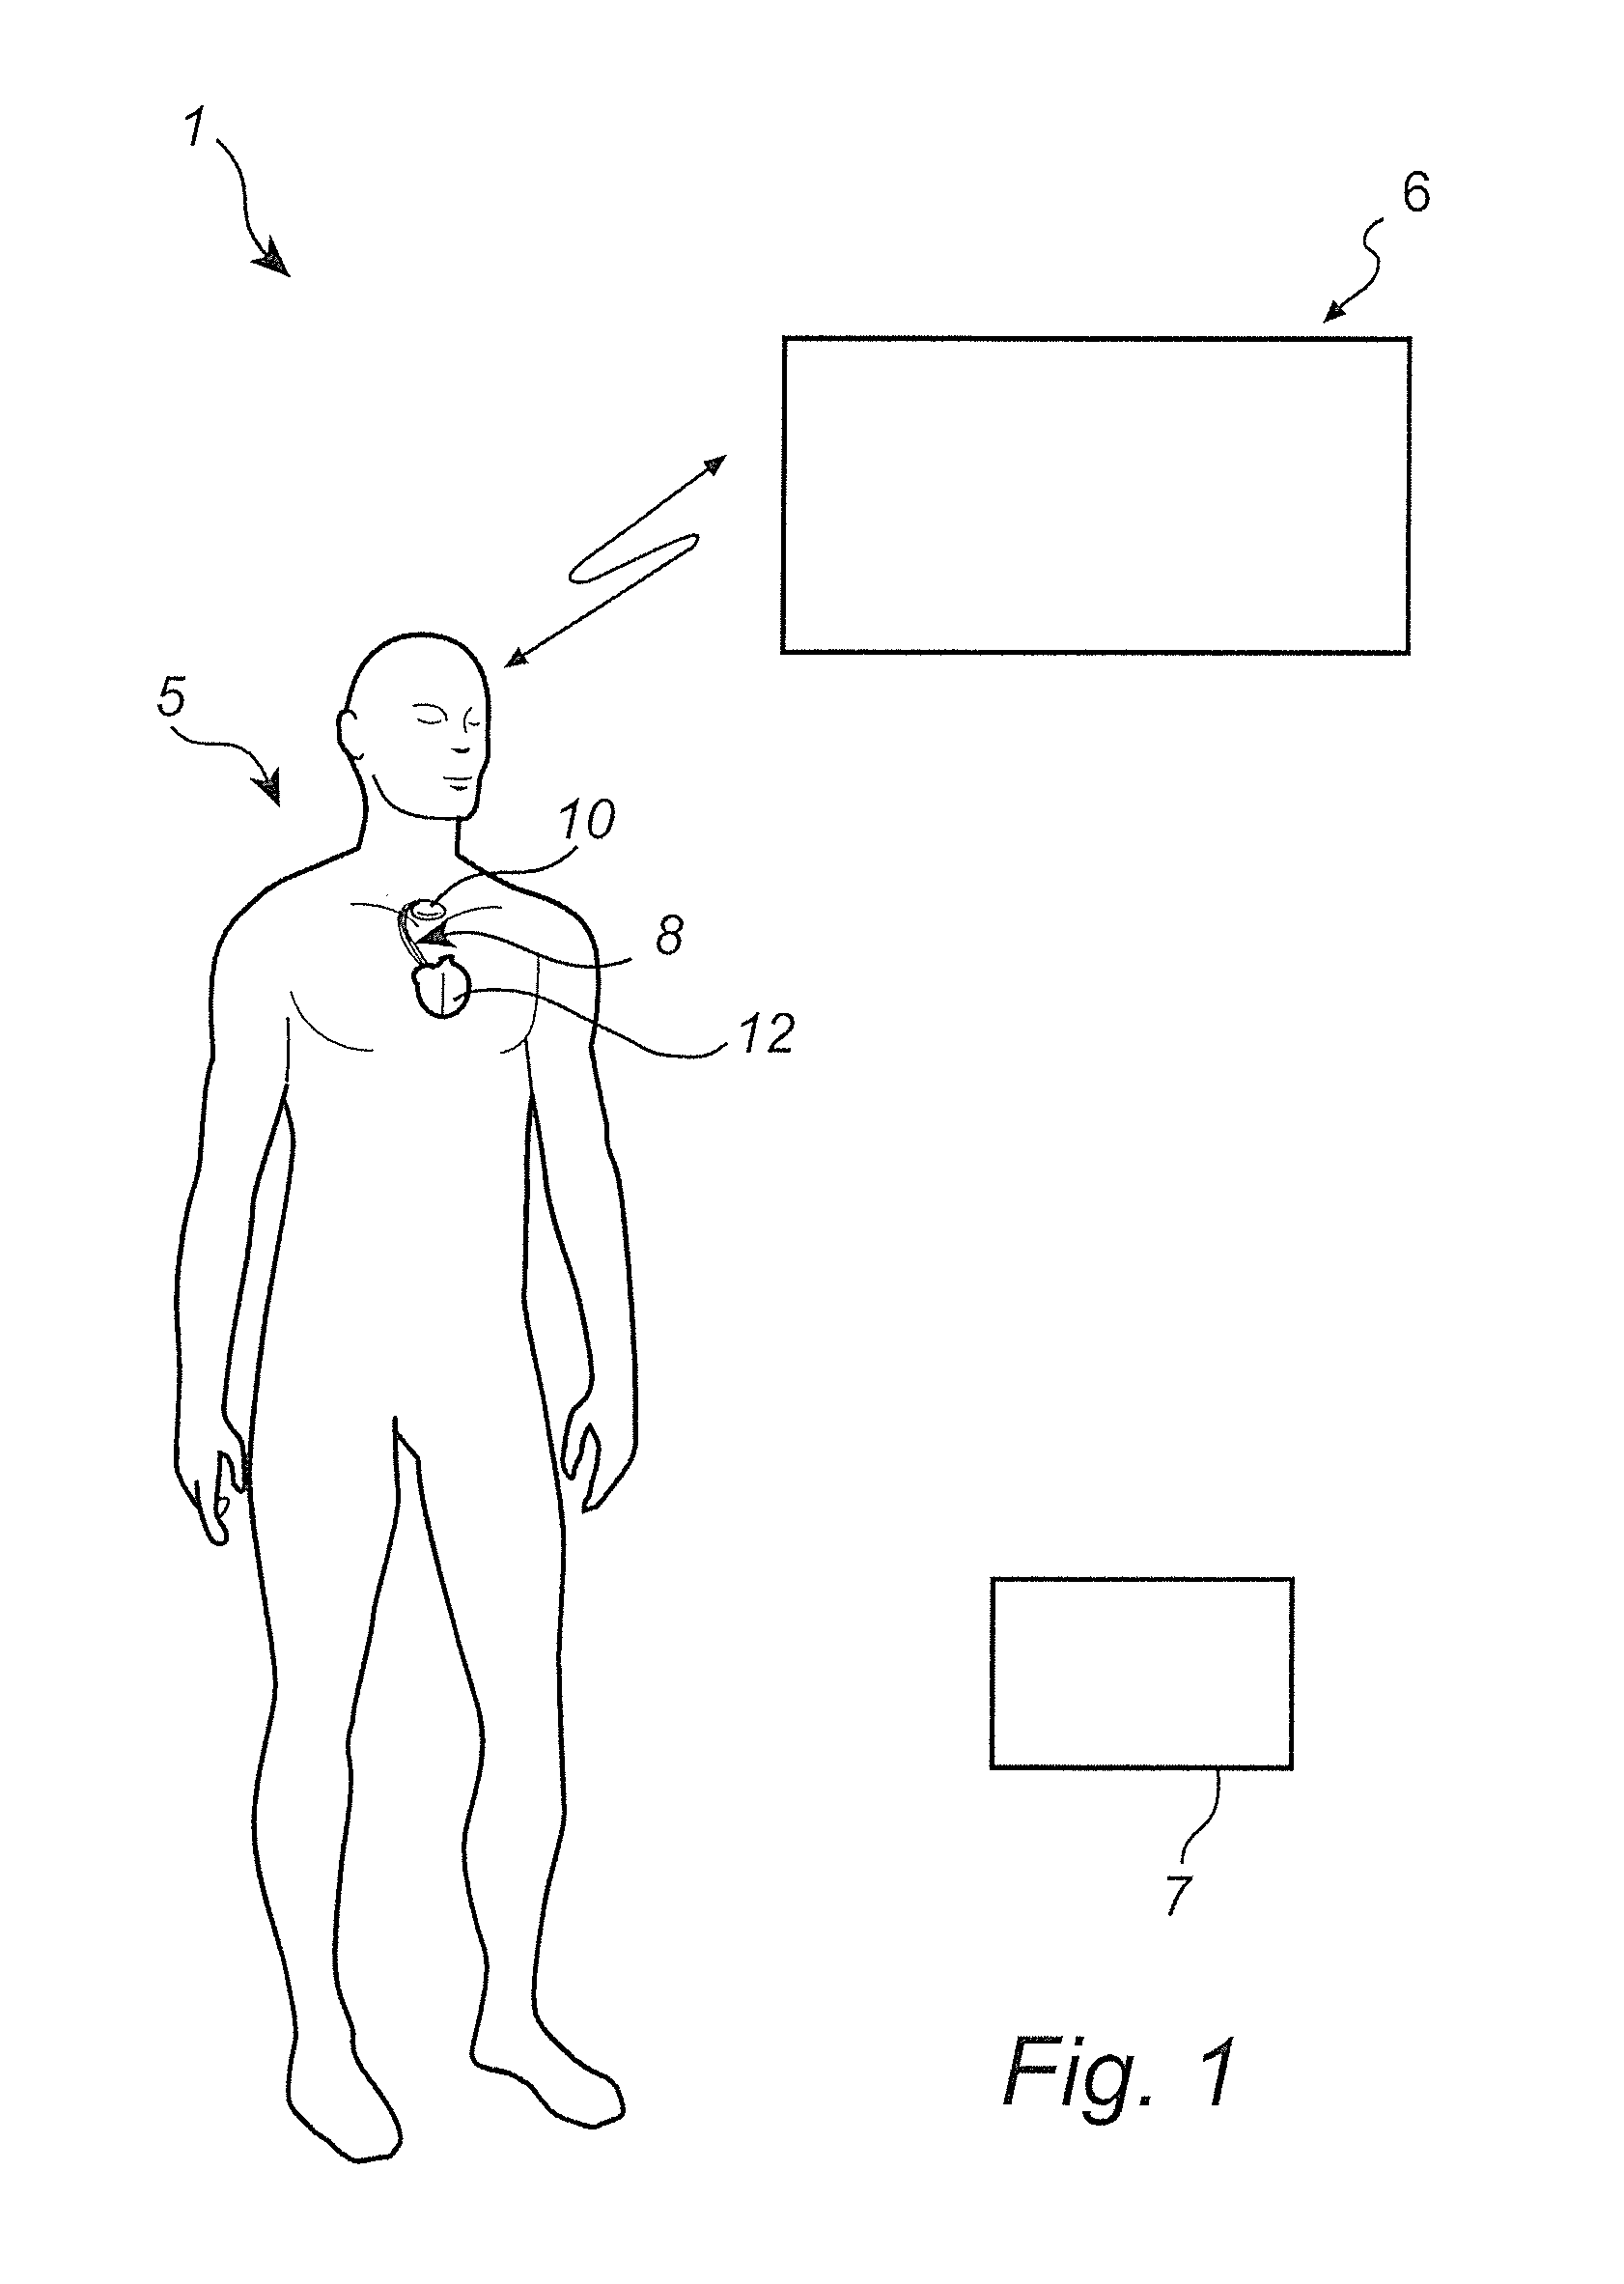 Method and system for adapting pacing settings of a cardiac stimulator